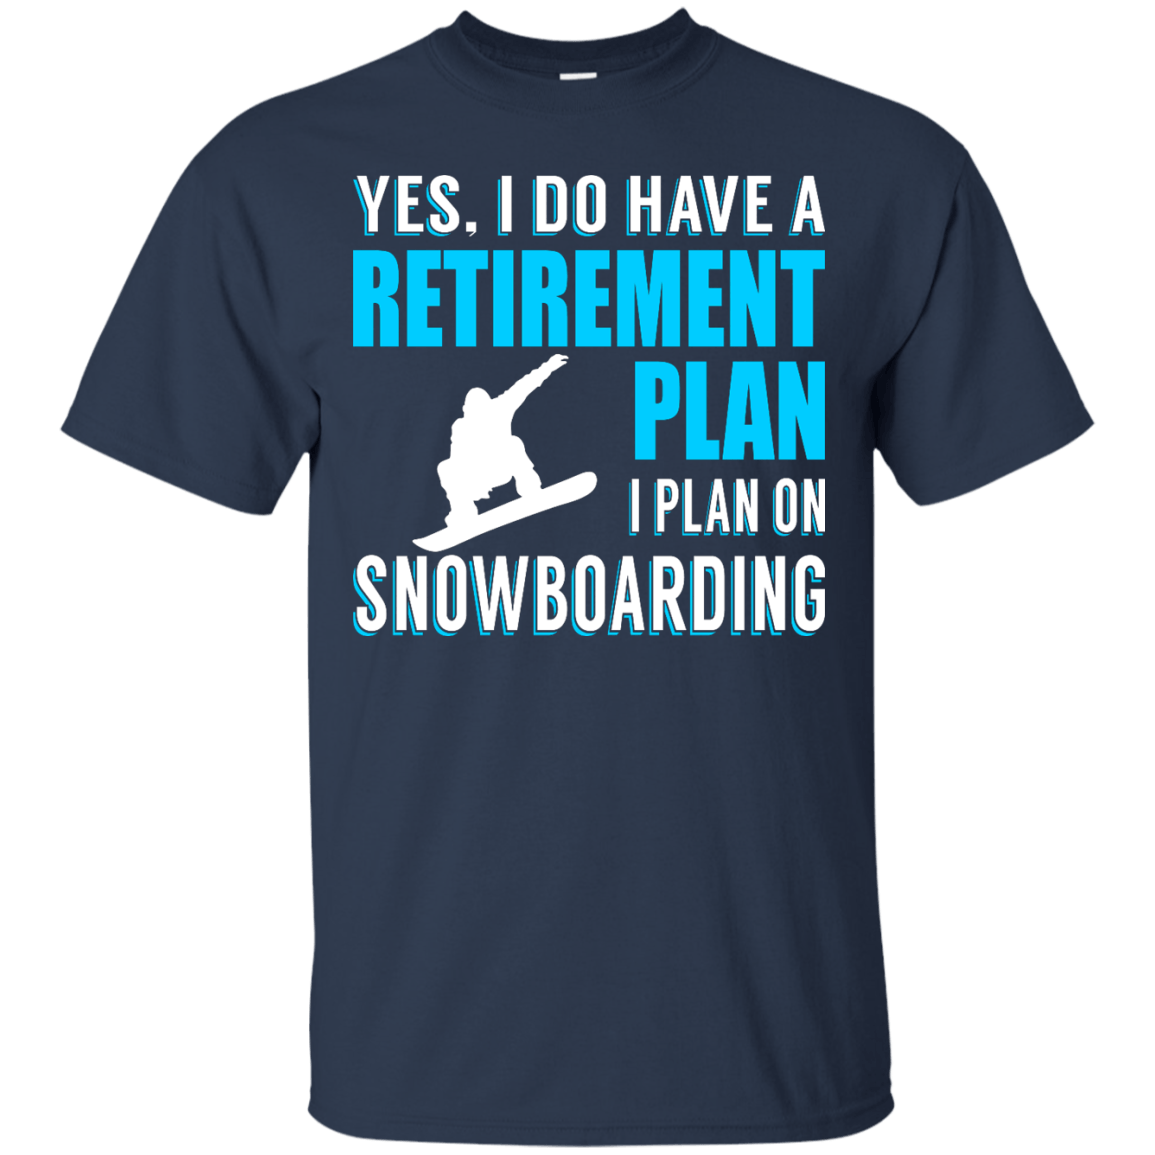 Yes, I Do Have A Retirement Plan - I Plan On Snowboarding Tees - Powderaddicts